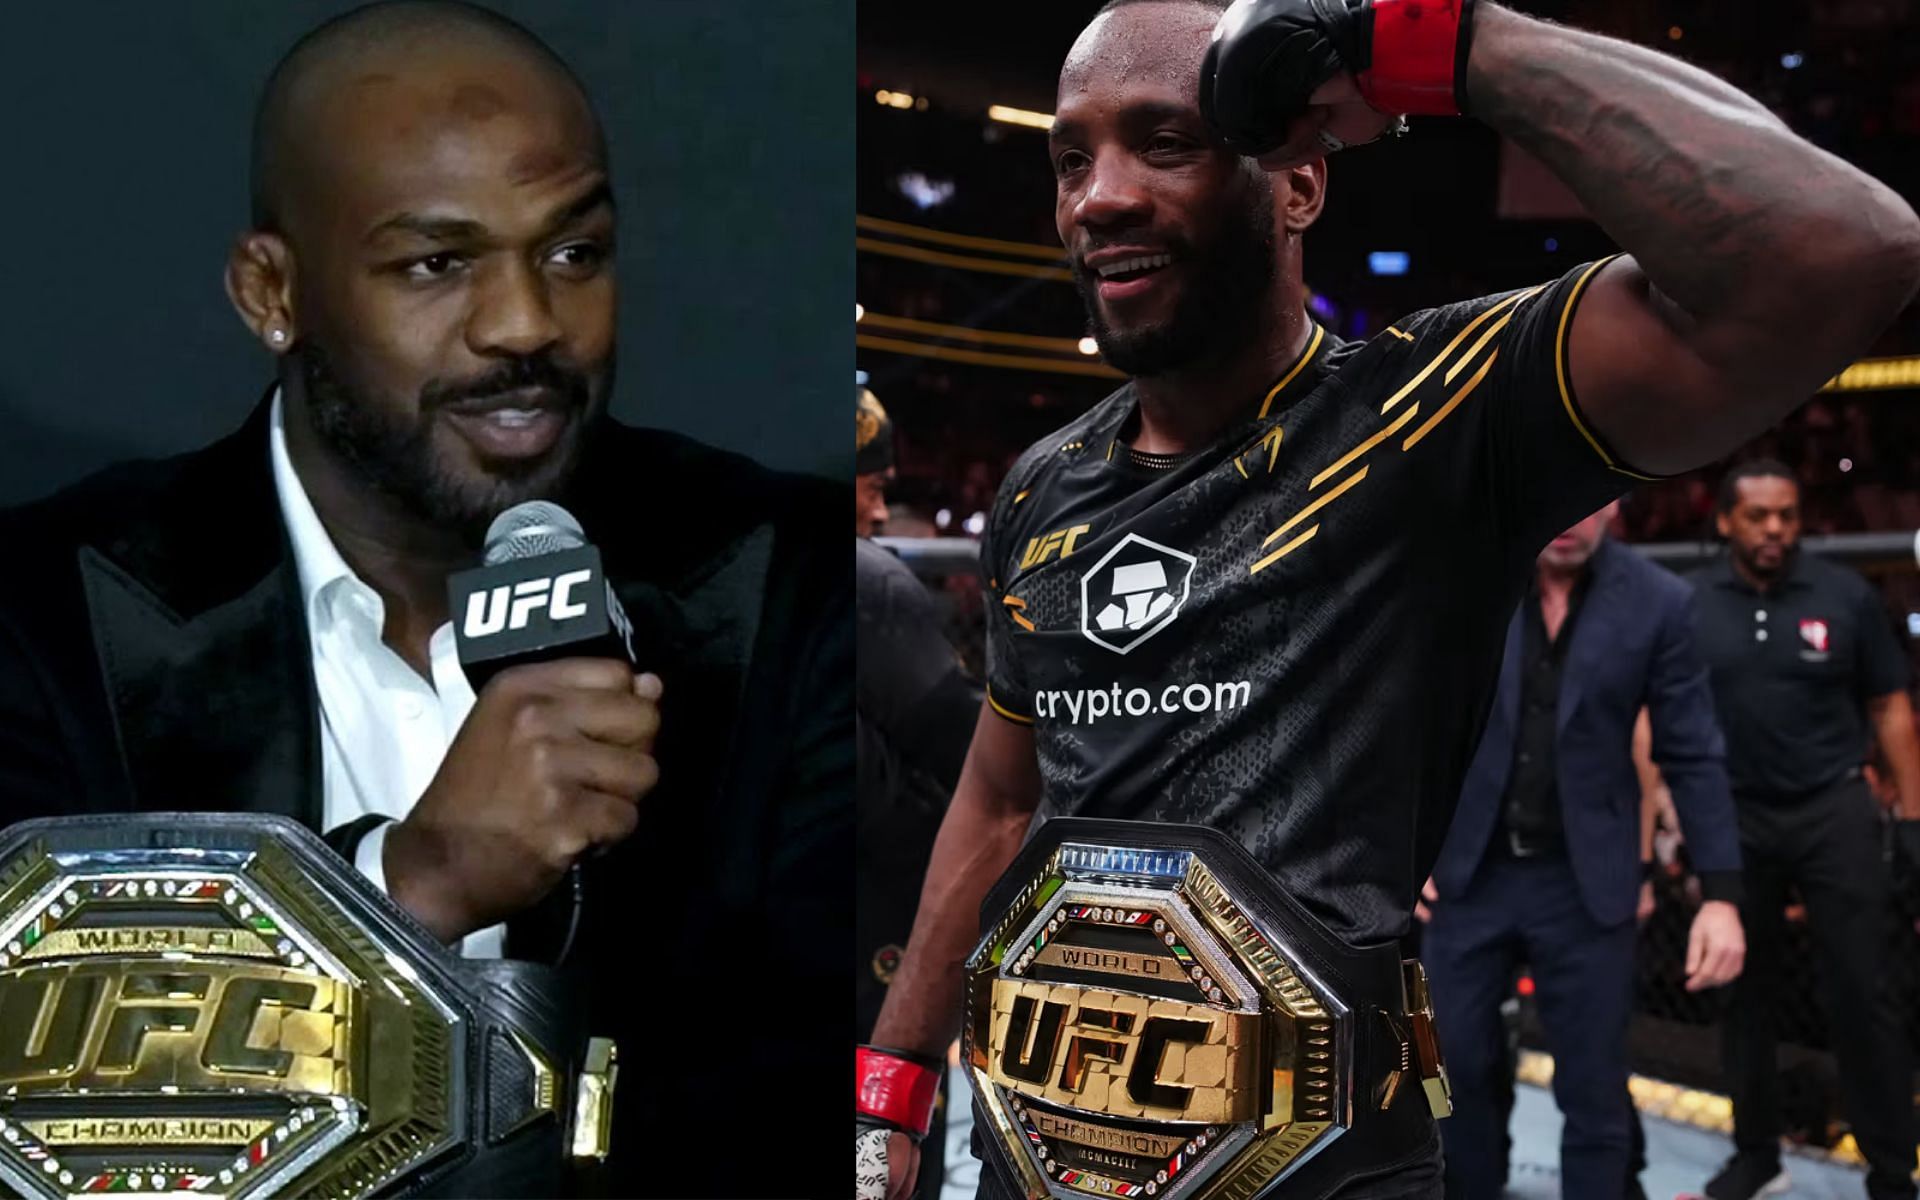 Jon Jones (left) offers to gift Leon Edwards (right) a present. (via Getty Images and UFC)